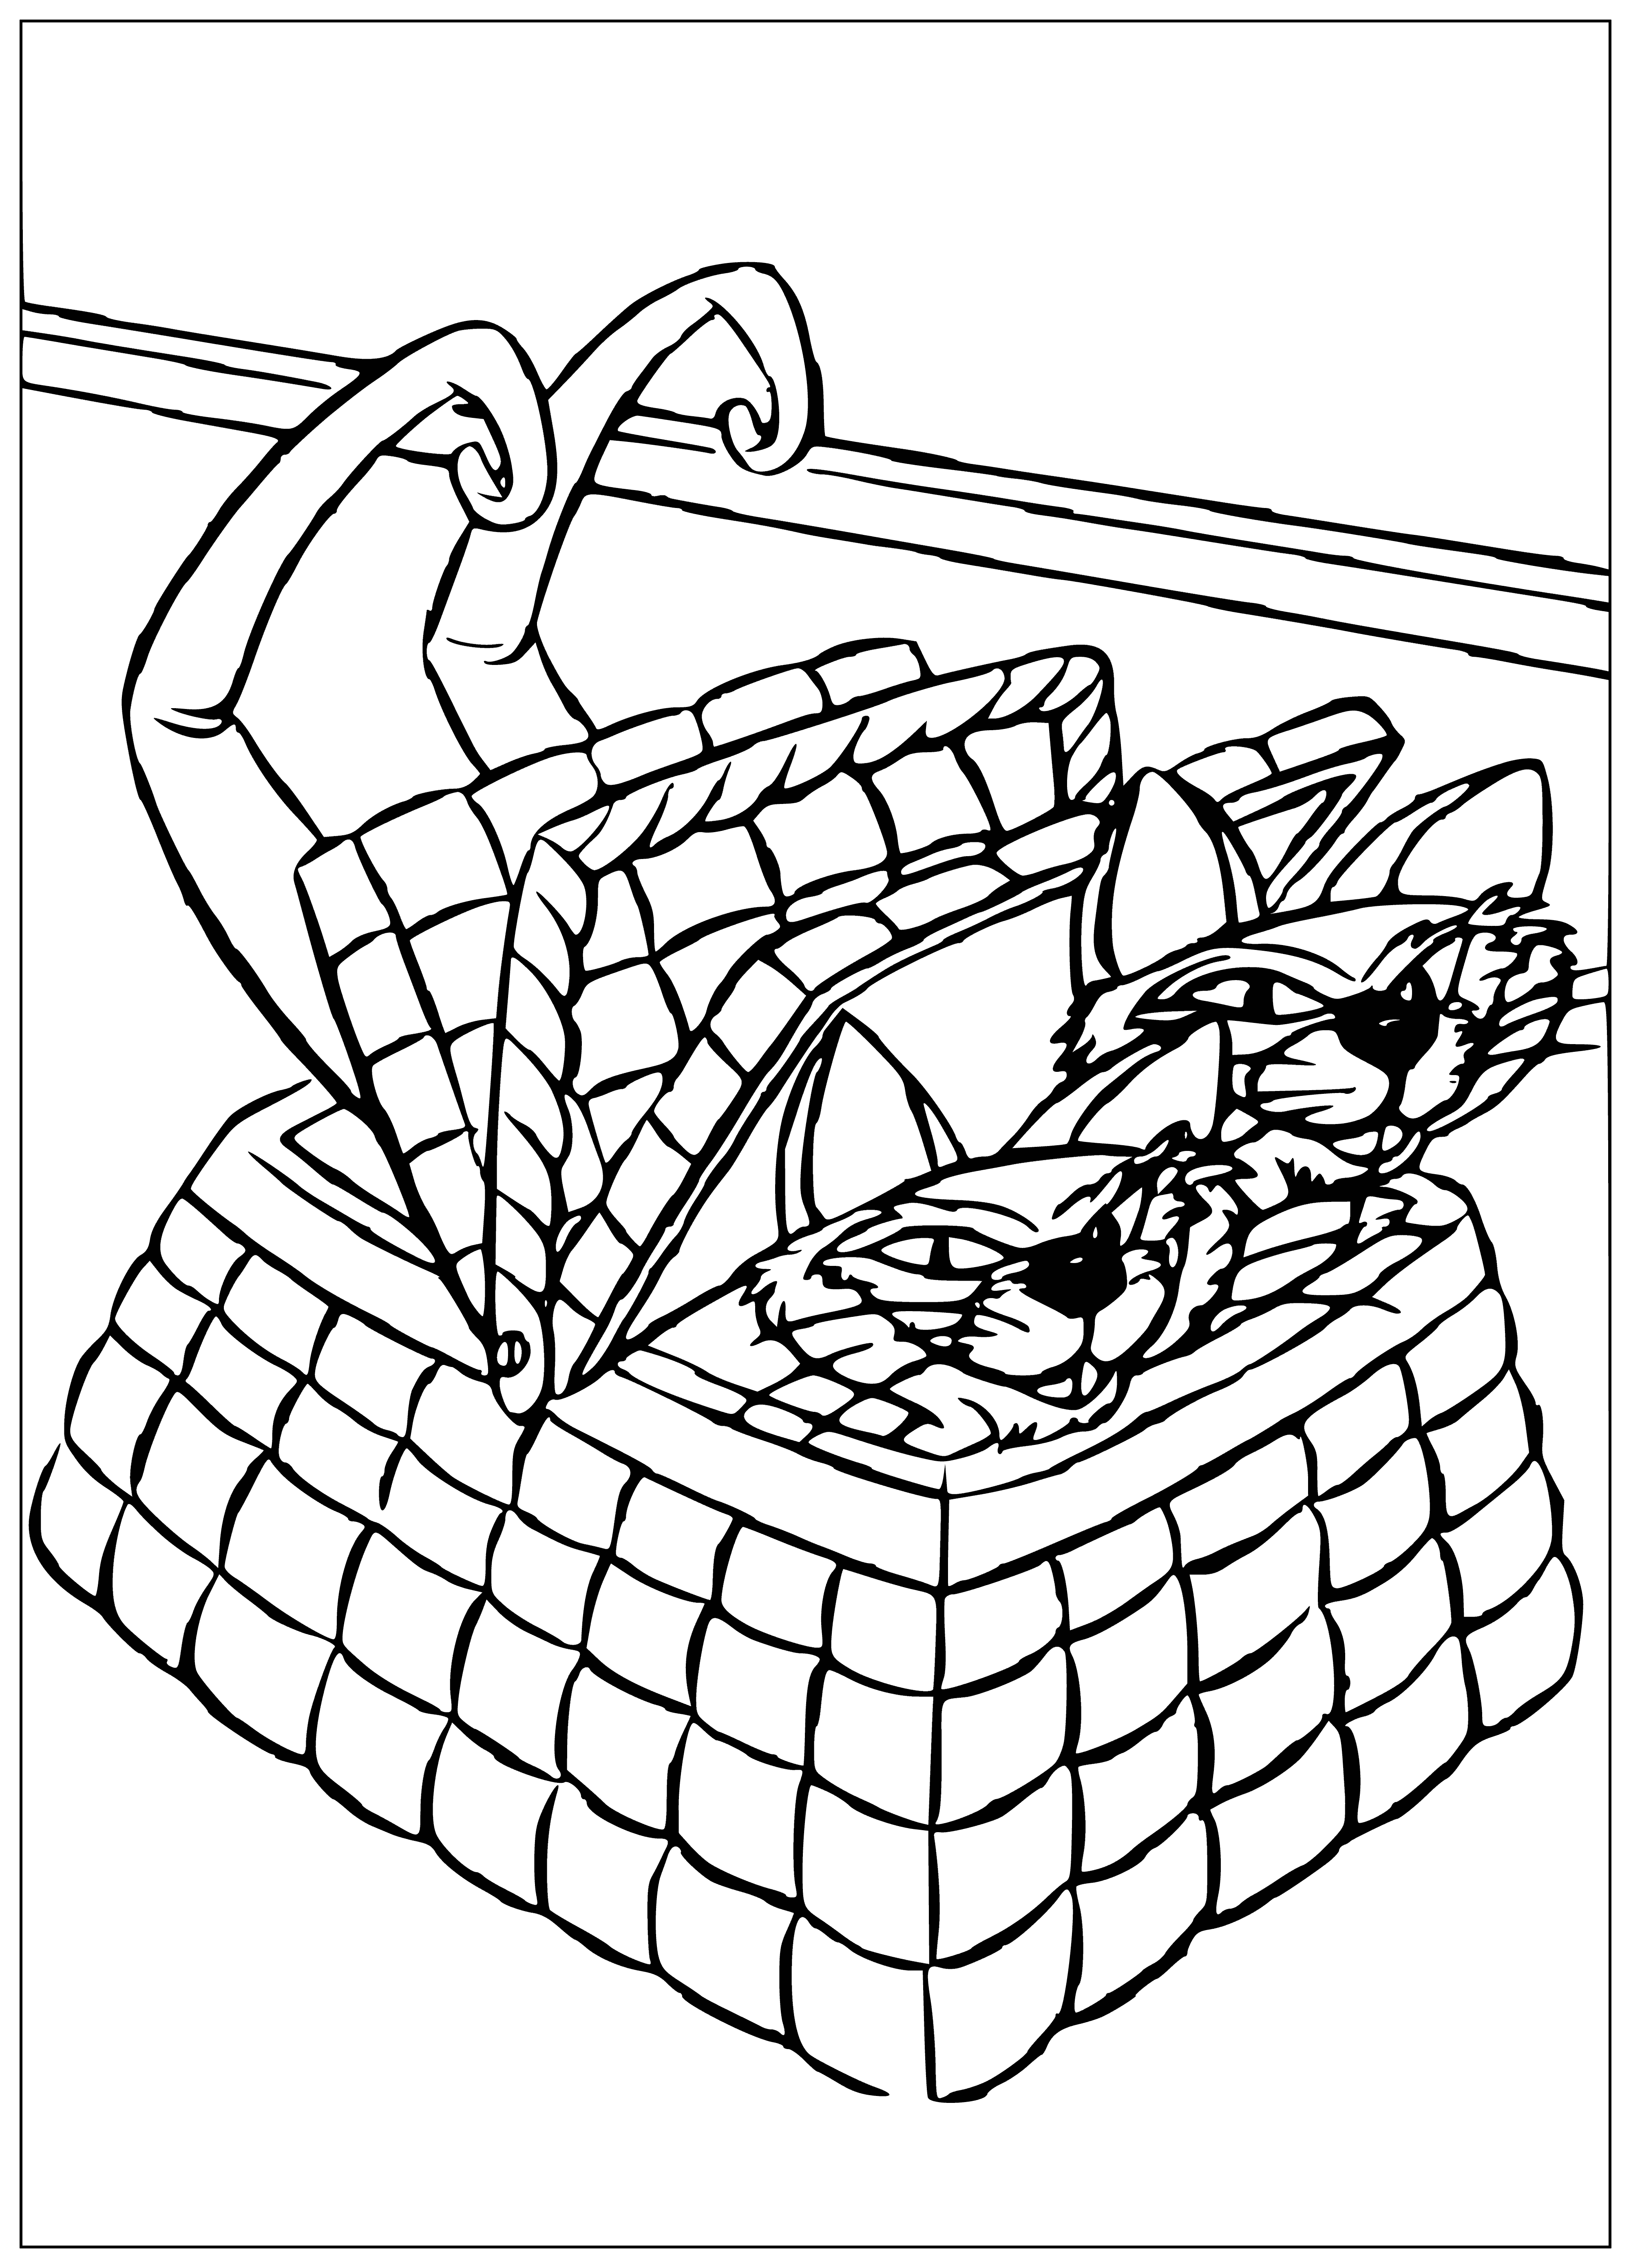 coloring page: Cat lounging on a couch with head on pillow, feet in air. #CatsAreTheCoolest